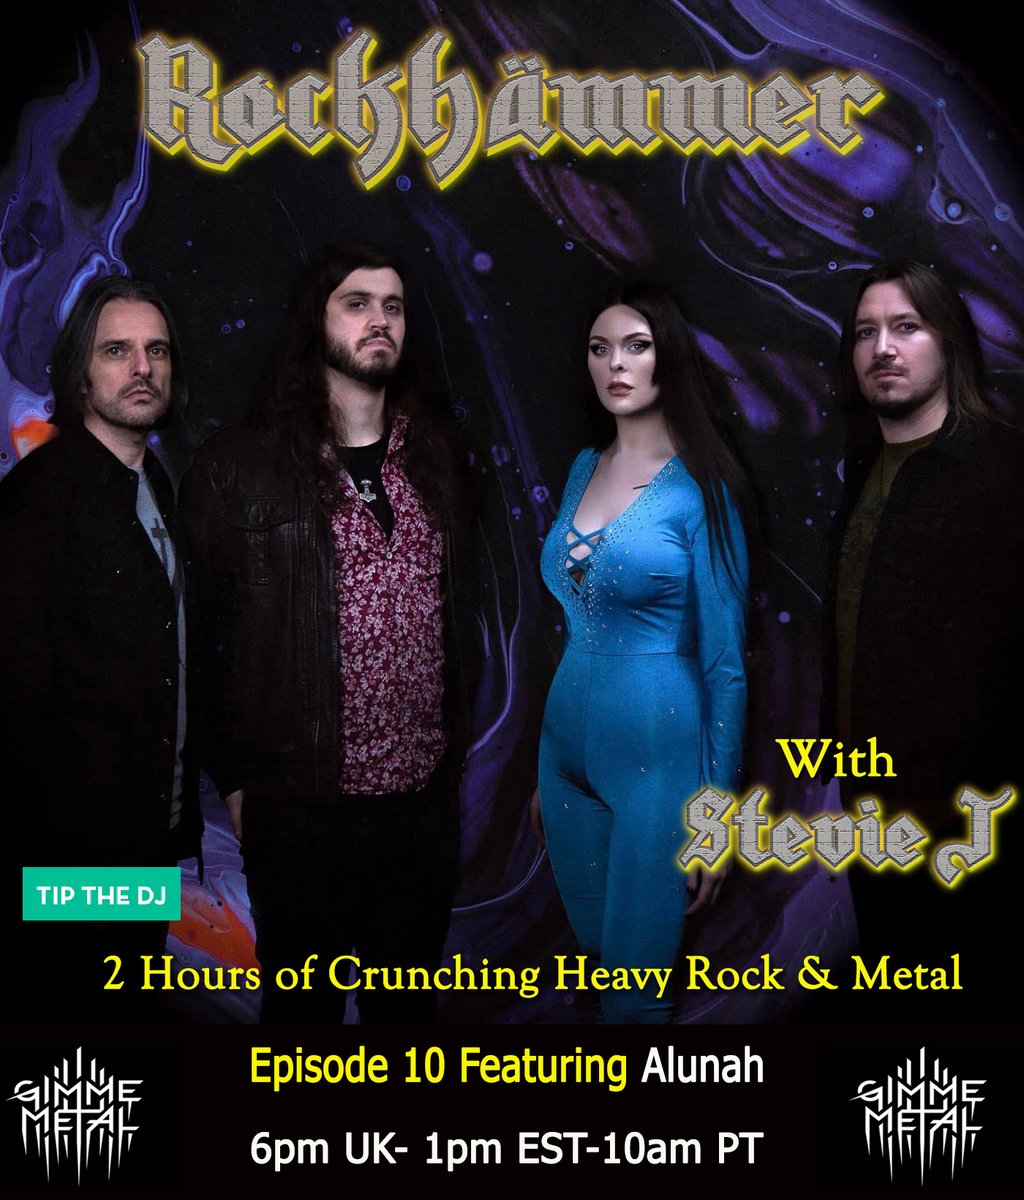 Time to go digging into the lost Archives again, & here's show 10 from my time at @gimmeradio featuring Birmingham's @alunahband Also top tunes from @sepulturacombr @mybaroness @boneatx @OrangeGoblin1 @RSprachrohr @Bokassaband @kataklysmband & much more! tinyurl.com/bdef34vp